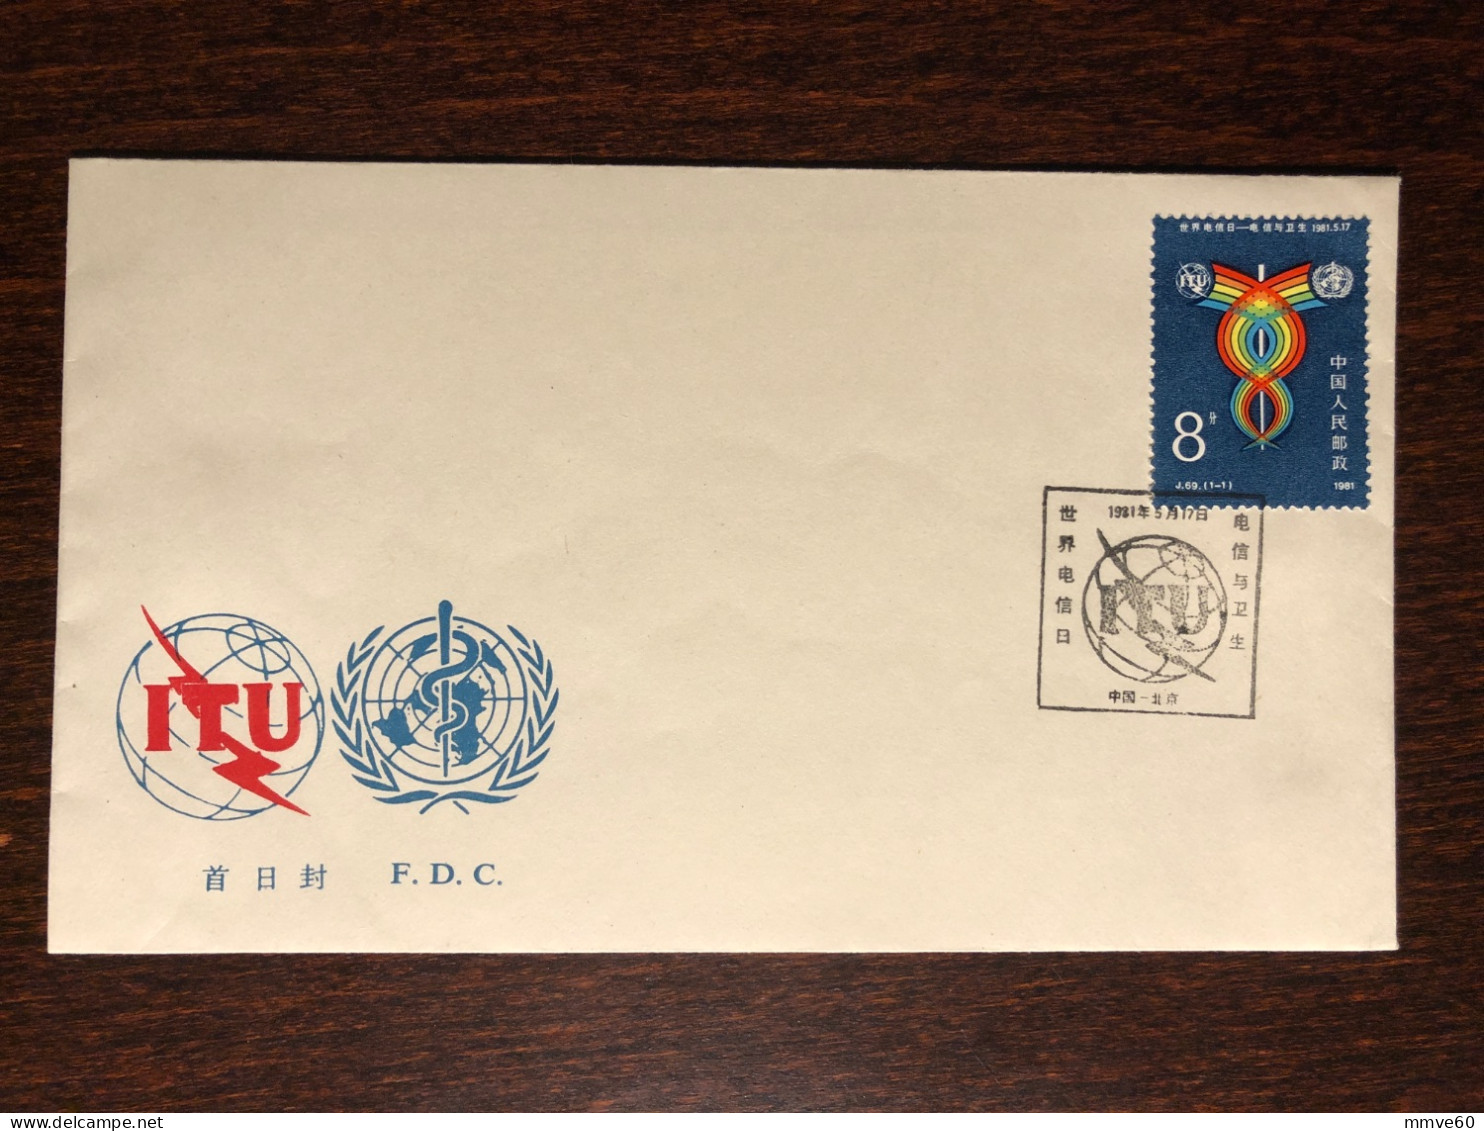 CHINA PRC  FDC COVER 1981 YEAR TELECOMMUNICATIONS AND HEALTH MEDICINE STAMPS - 1980-1989